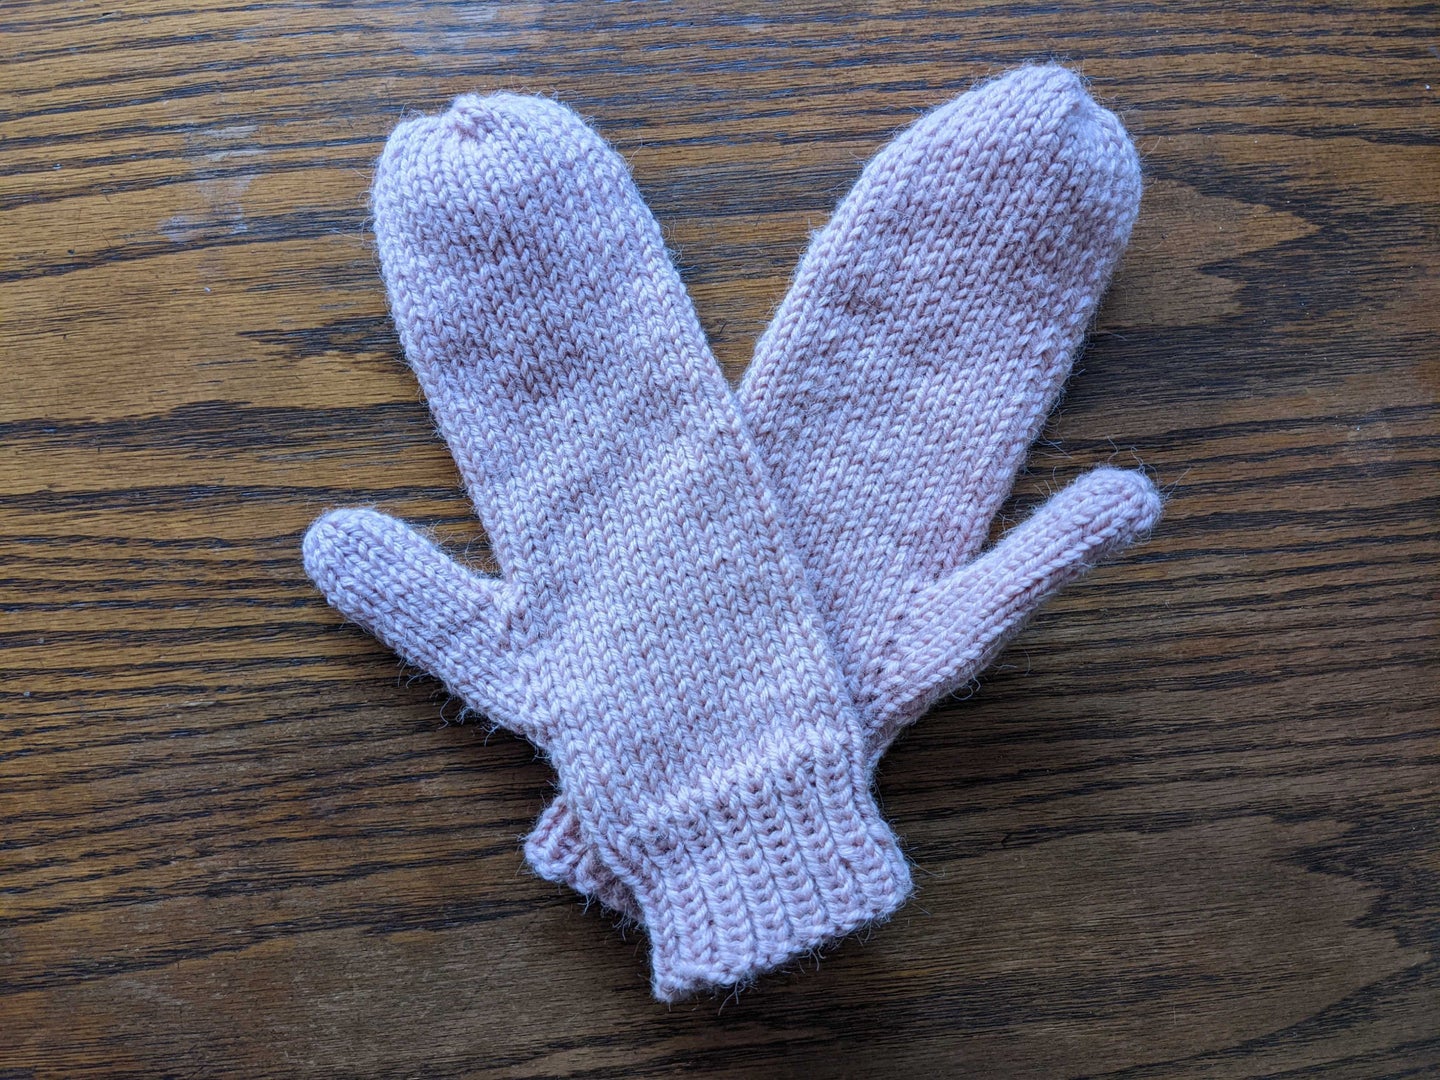 A pair of pink mittens on a wood surface.